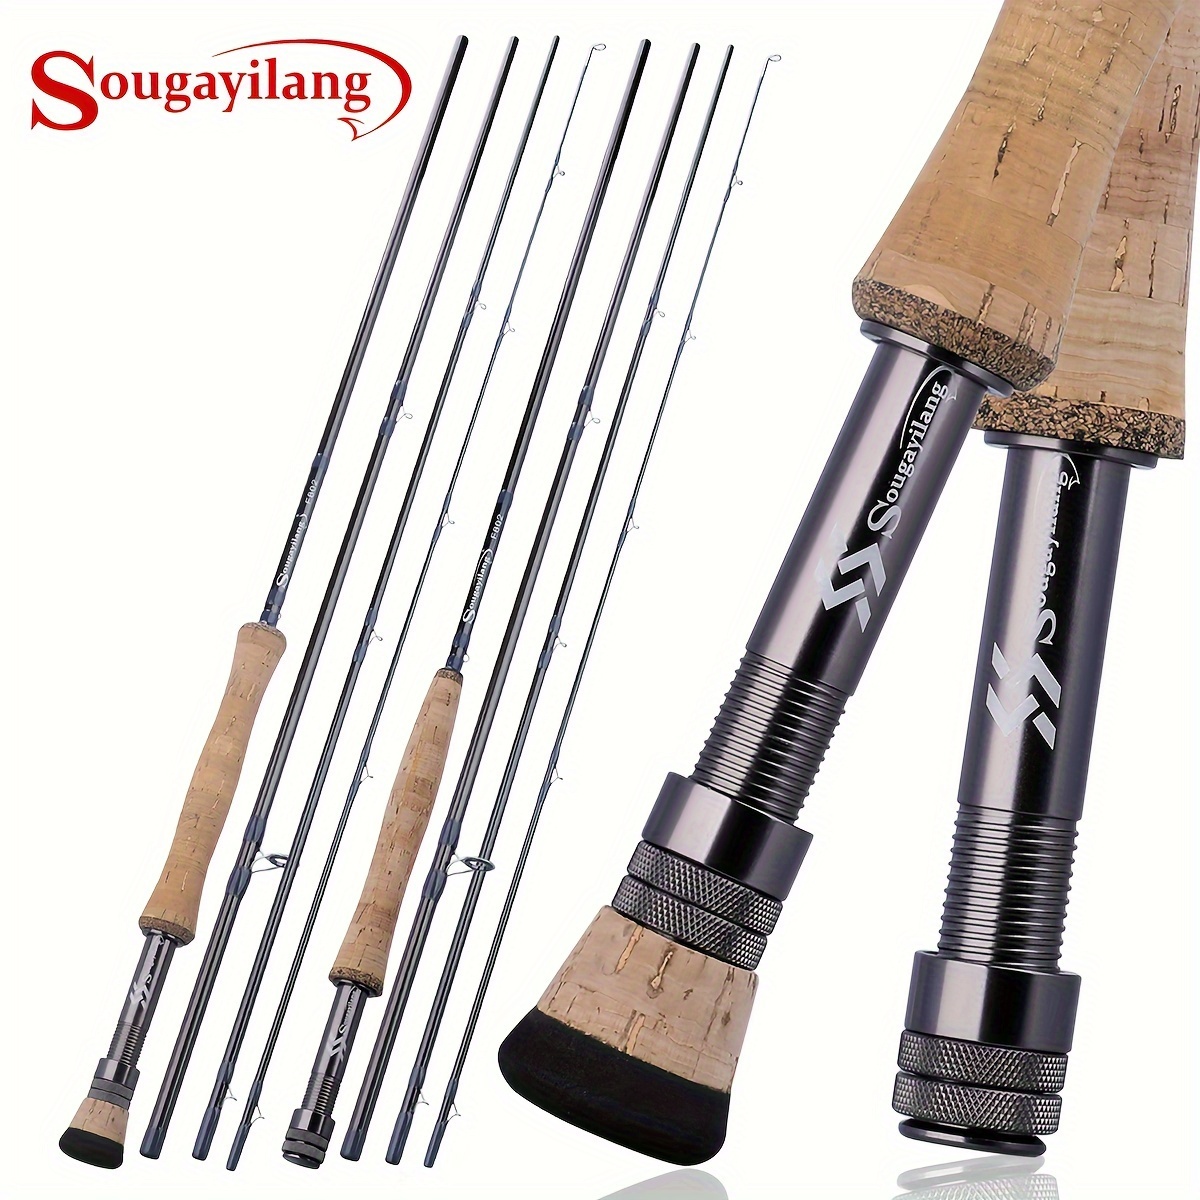 Sougayilang Fly Fishing Rod and Reel Combo, 4 Pieces Ultra-weight